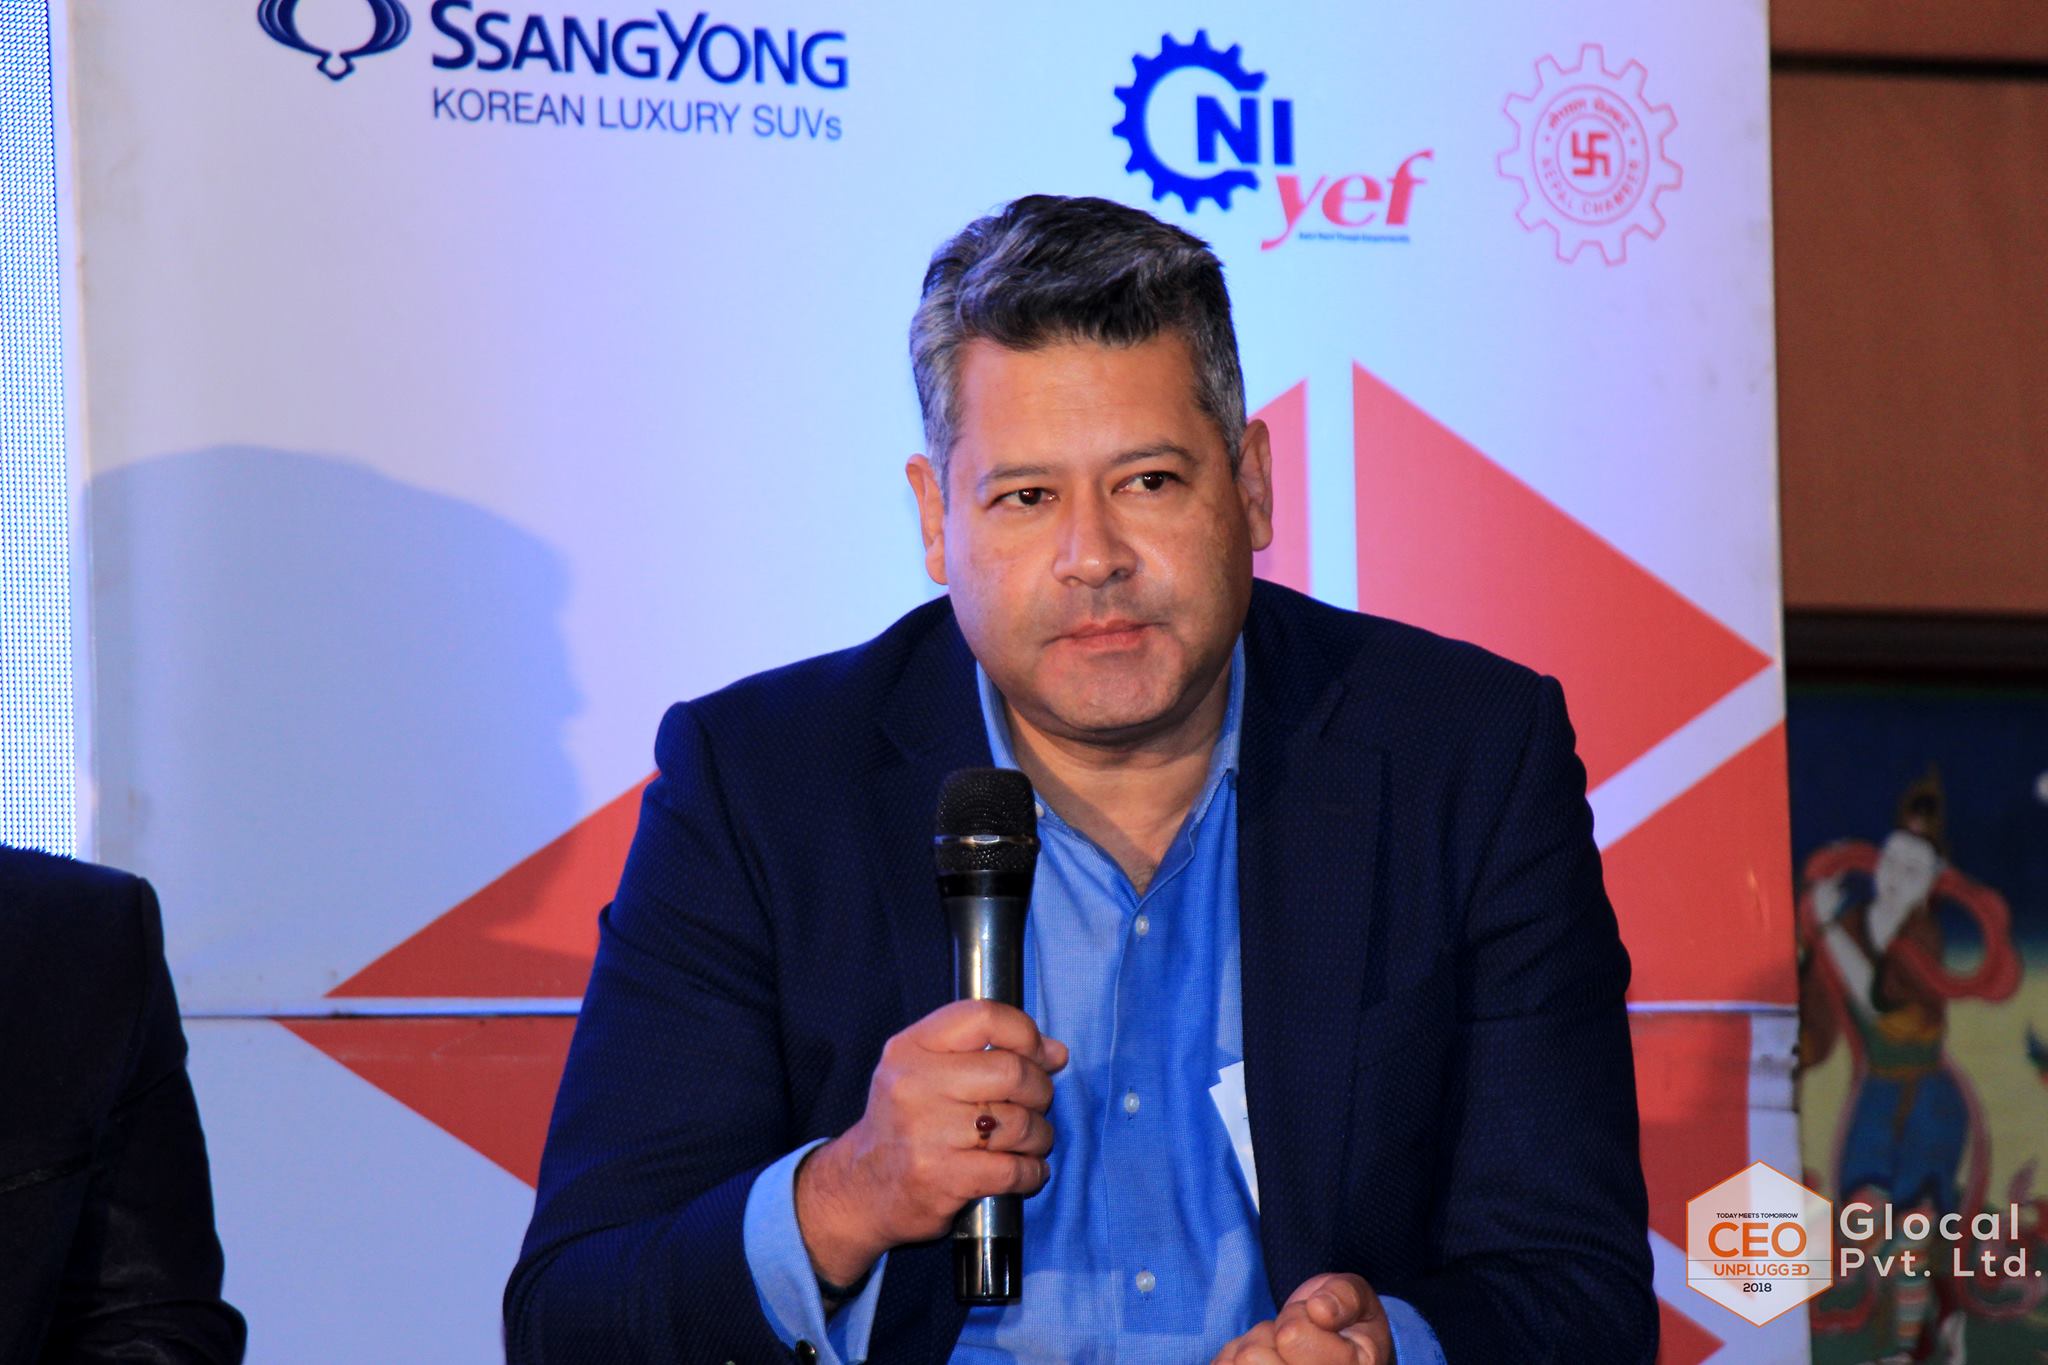 https://ceo.glocalnepal.com/wp-content/uploads/2018/12/ceo-unplugged-3.jpg